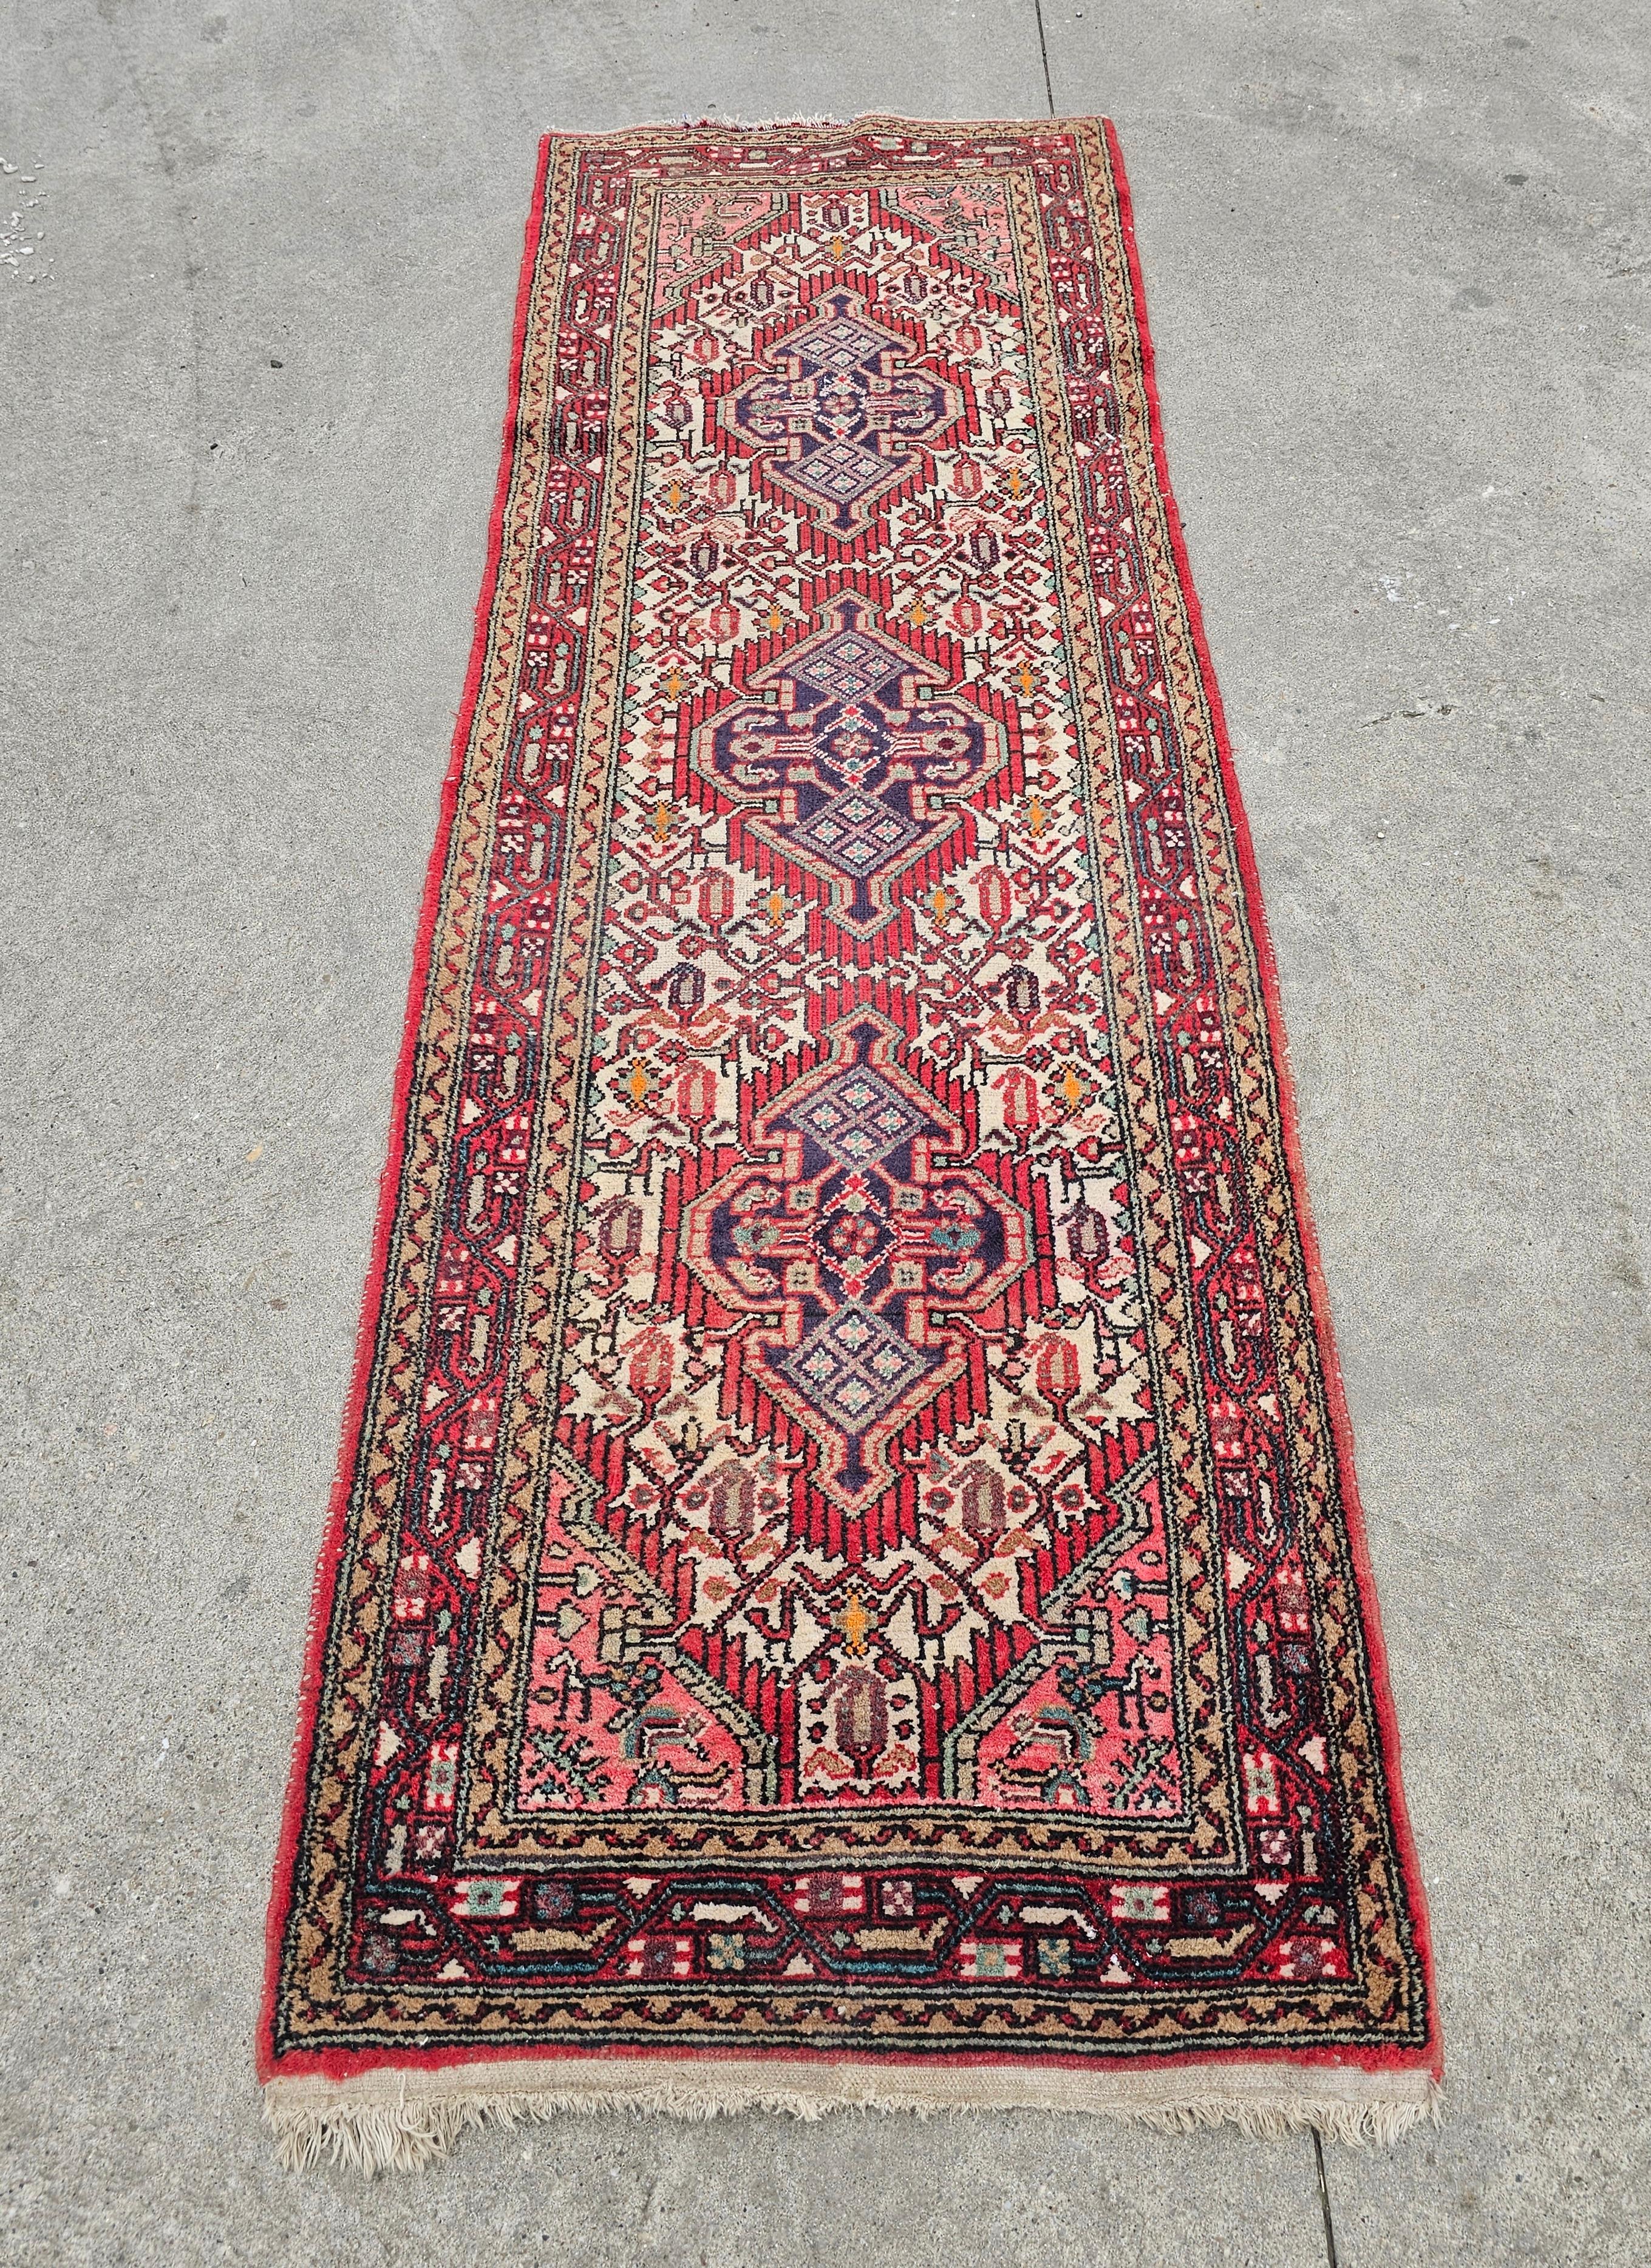 In this listing you will find a beautiful vintage Persian Hamadan Runner rug, with gorgeous tribal pattern. The runner is hand-knotted and made of 100% wool.

Good vintage condition with some signs of time and use, as shown in pictures.

When